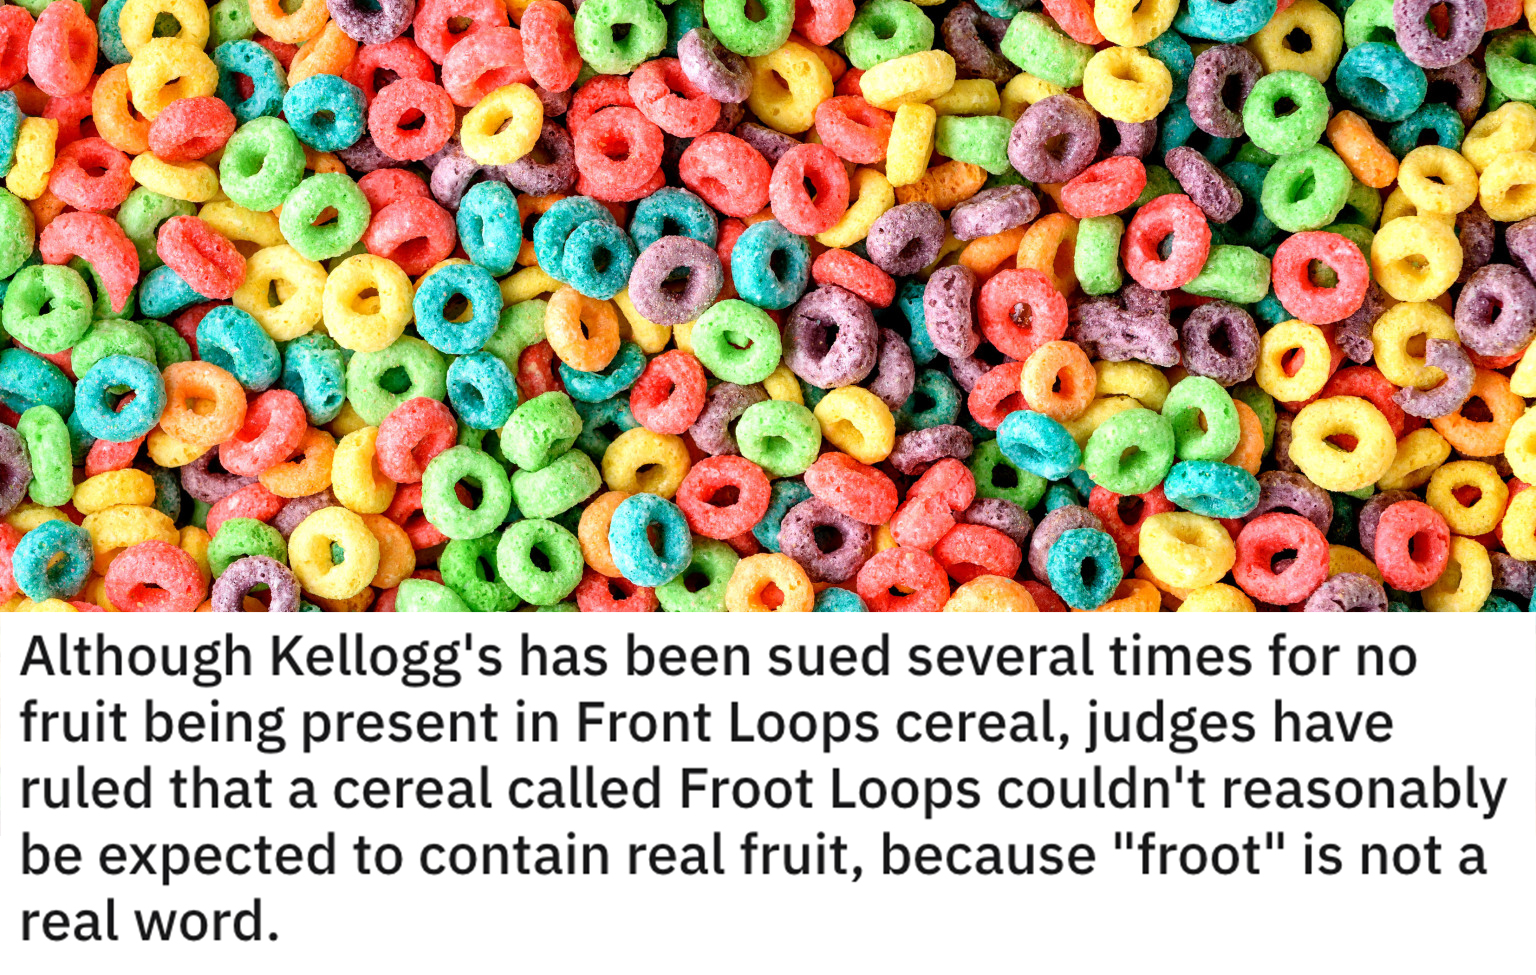 funny loopholes - Although Kellogg's has been sued several times for no fruit being present in Front Loops cereal, judges have ruled that a cereal called Froot Loops couldn't reasonably be expected to contain real fruit, because